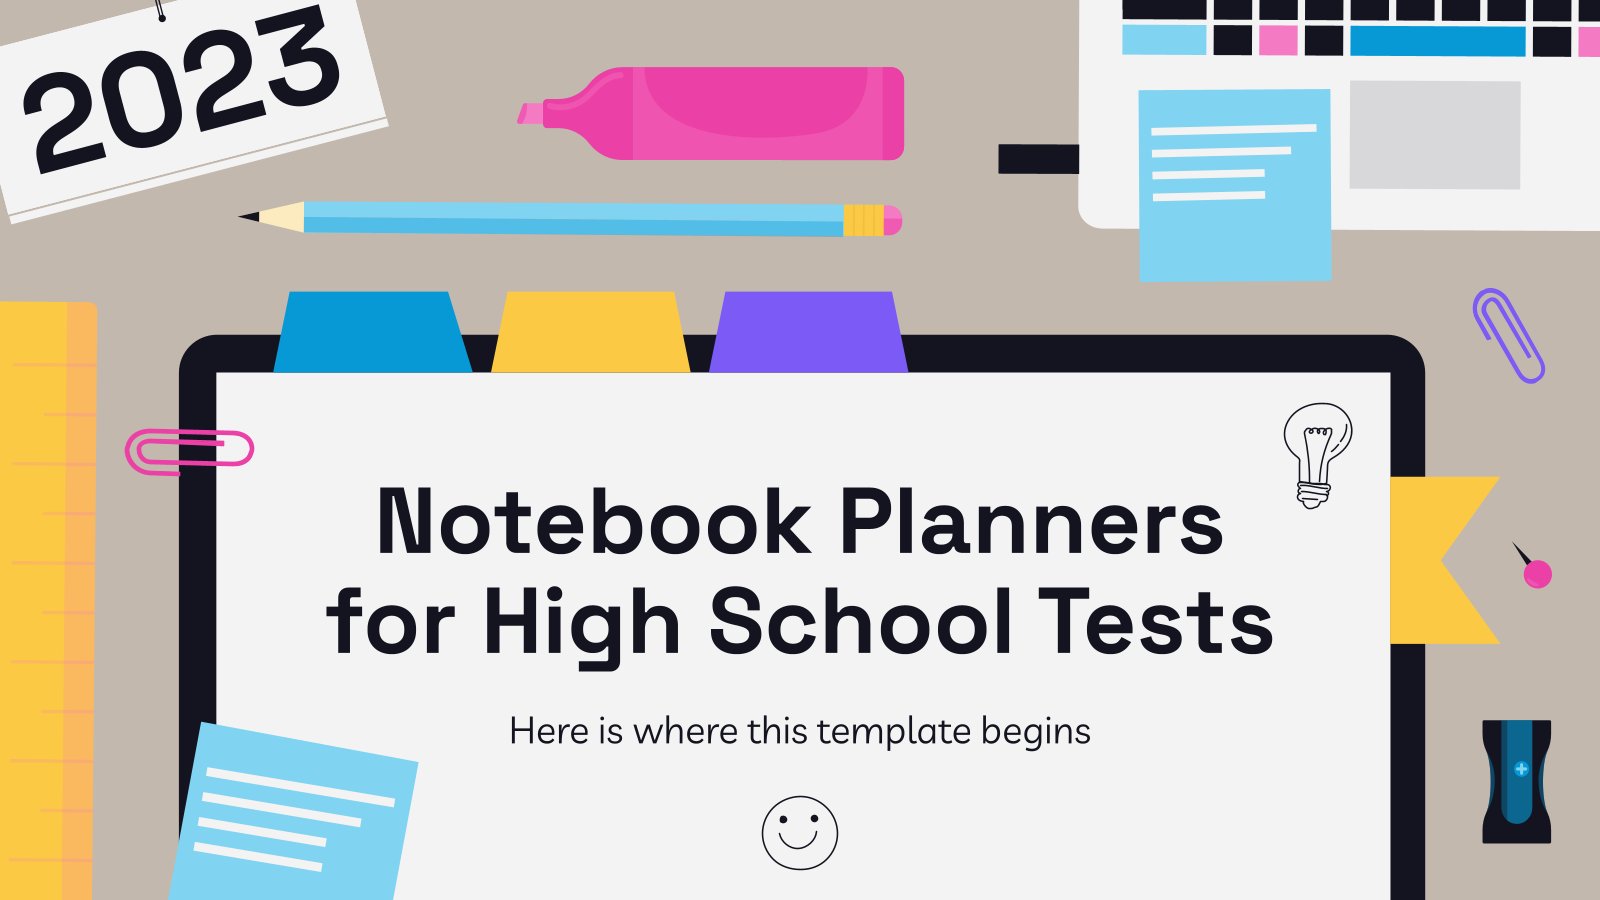 Notebook Planners for High School Tests presentation template 